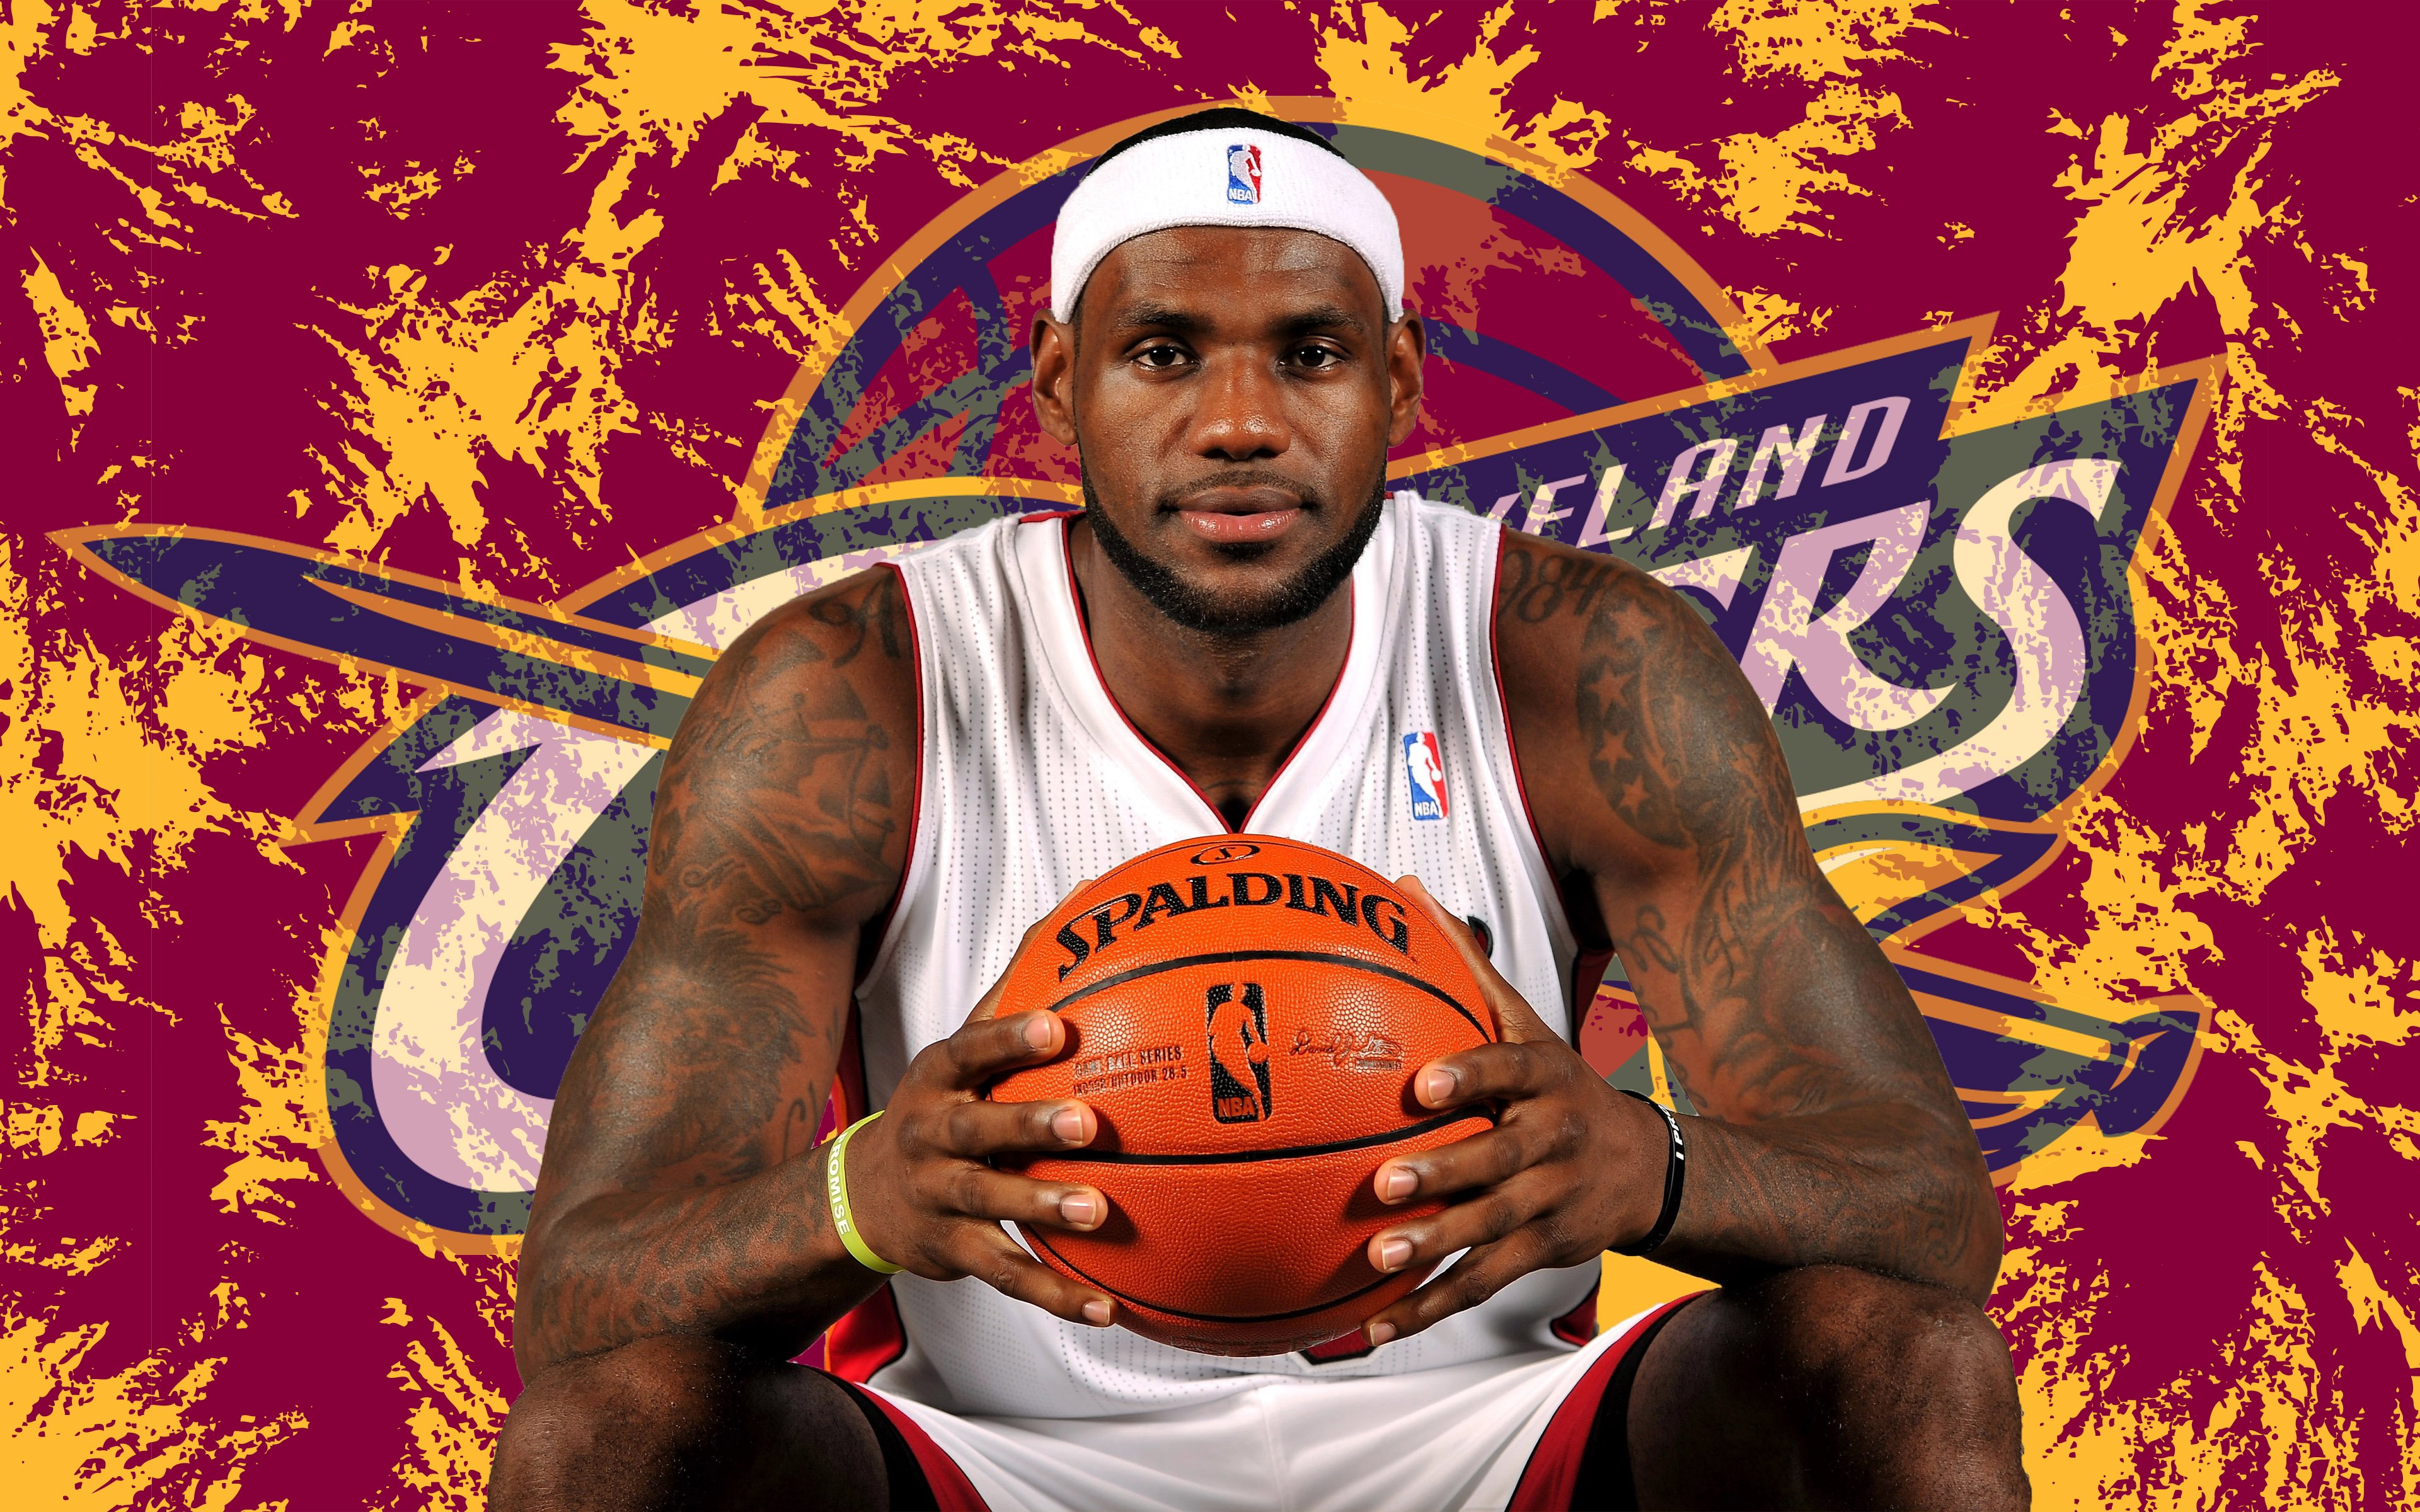 Lebron James And The Cleveland Cavaliers - 3840x2400 Wallpaper 